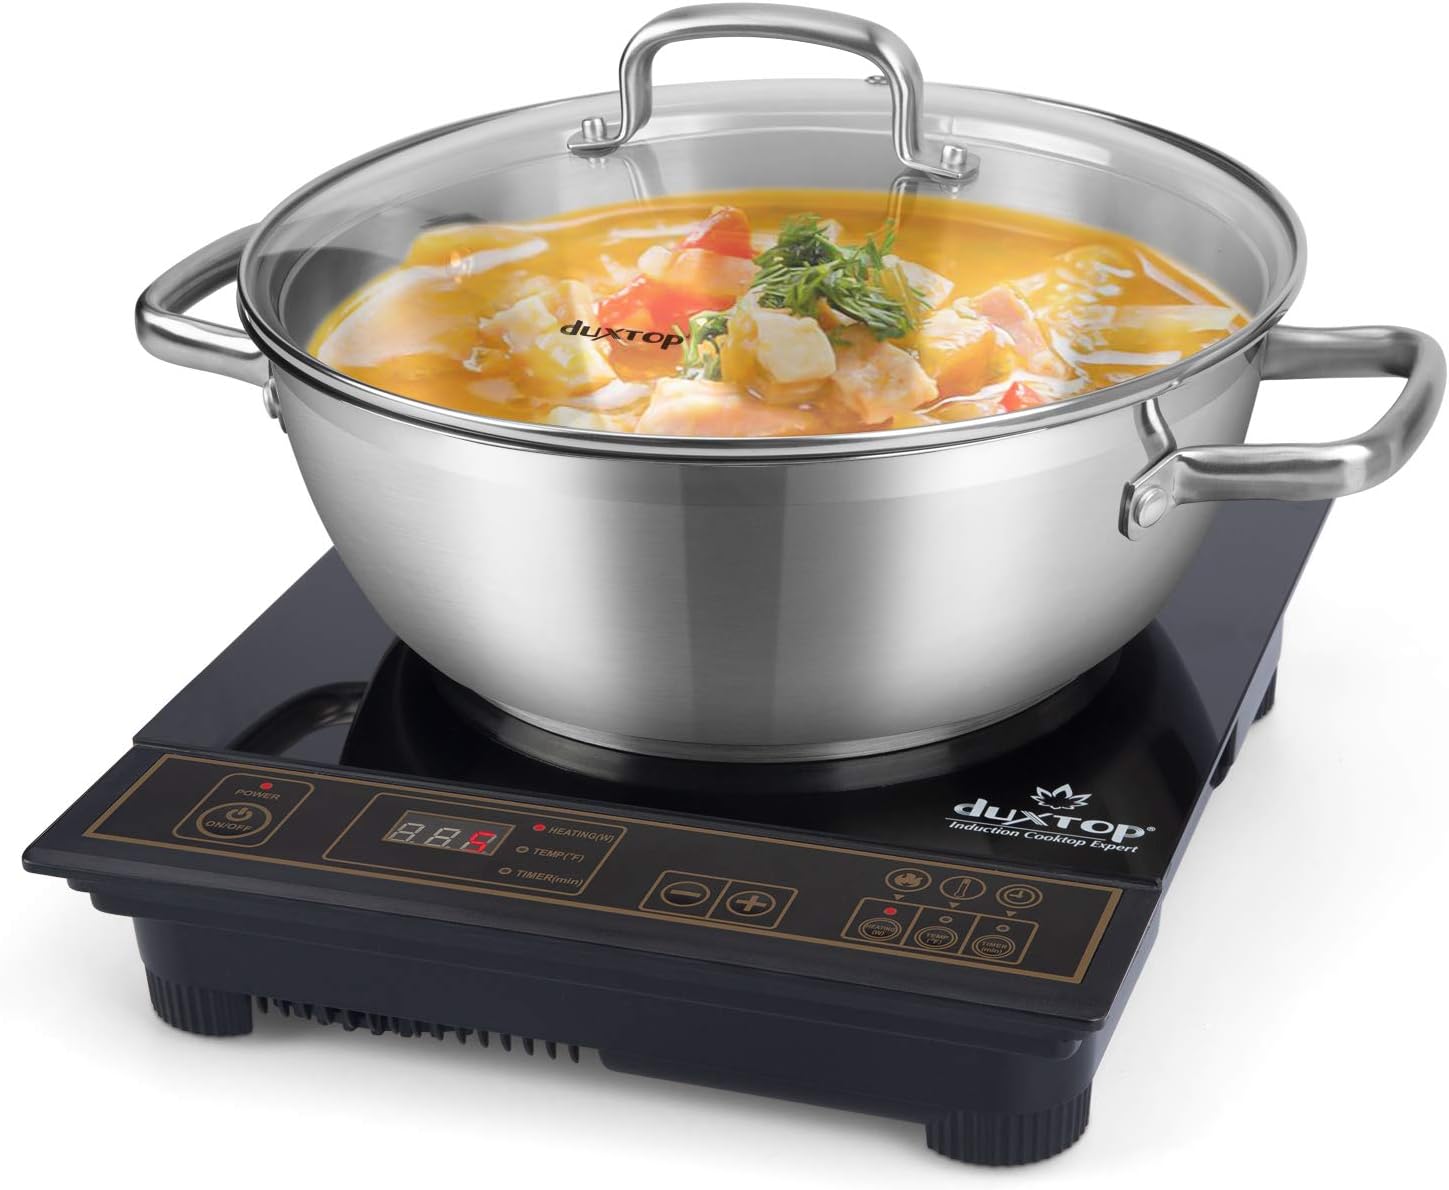 Duxtop 1800W Portable Induction Cooktop 2 Burner, Built-In Countertop  Burners with Adjustable Temperature Control, Sensor Touch Induction Burner  with